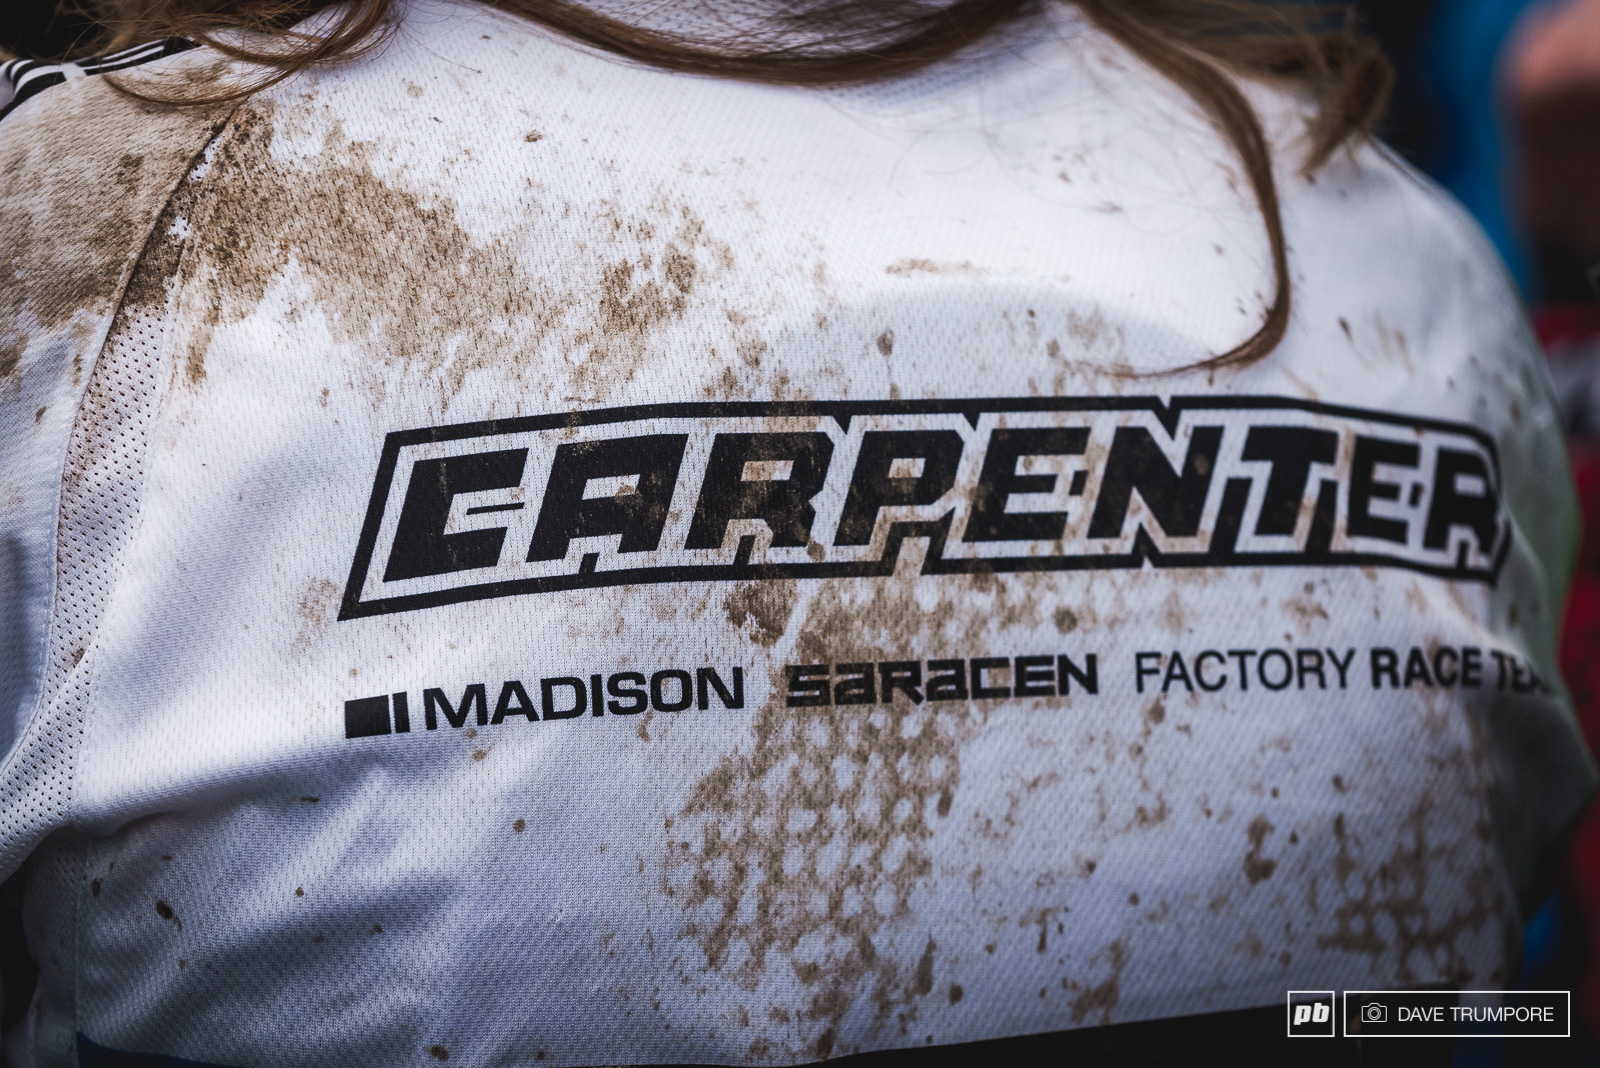 The dirt on the back of the jersey tells the tale of the day for Manon Carpenter who took a scary slam off the final jump just meters from the finish arena.